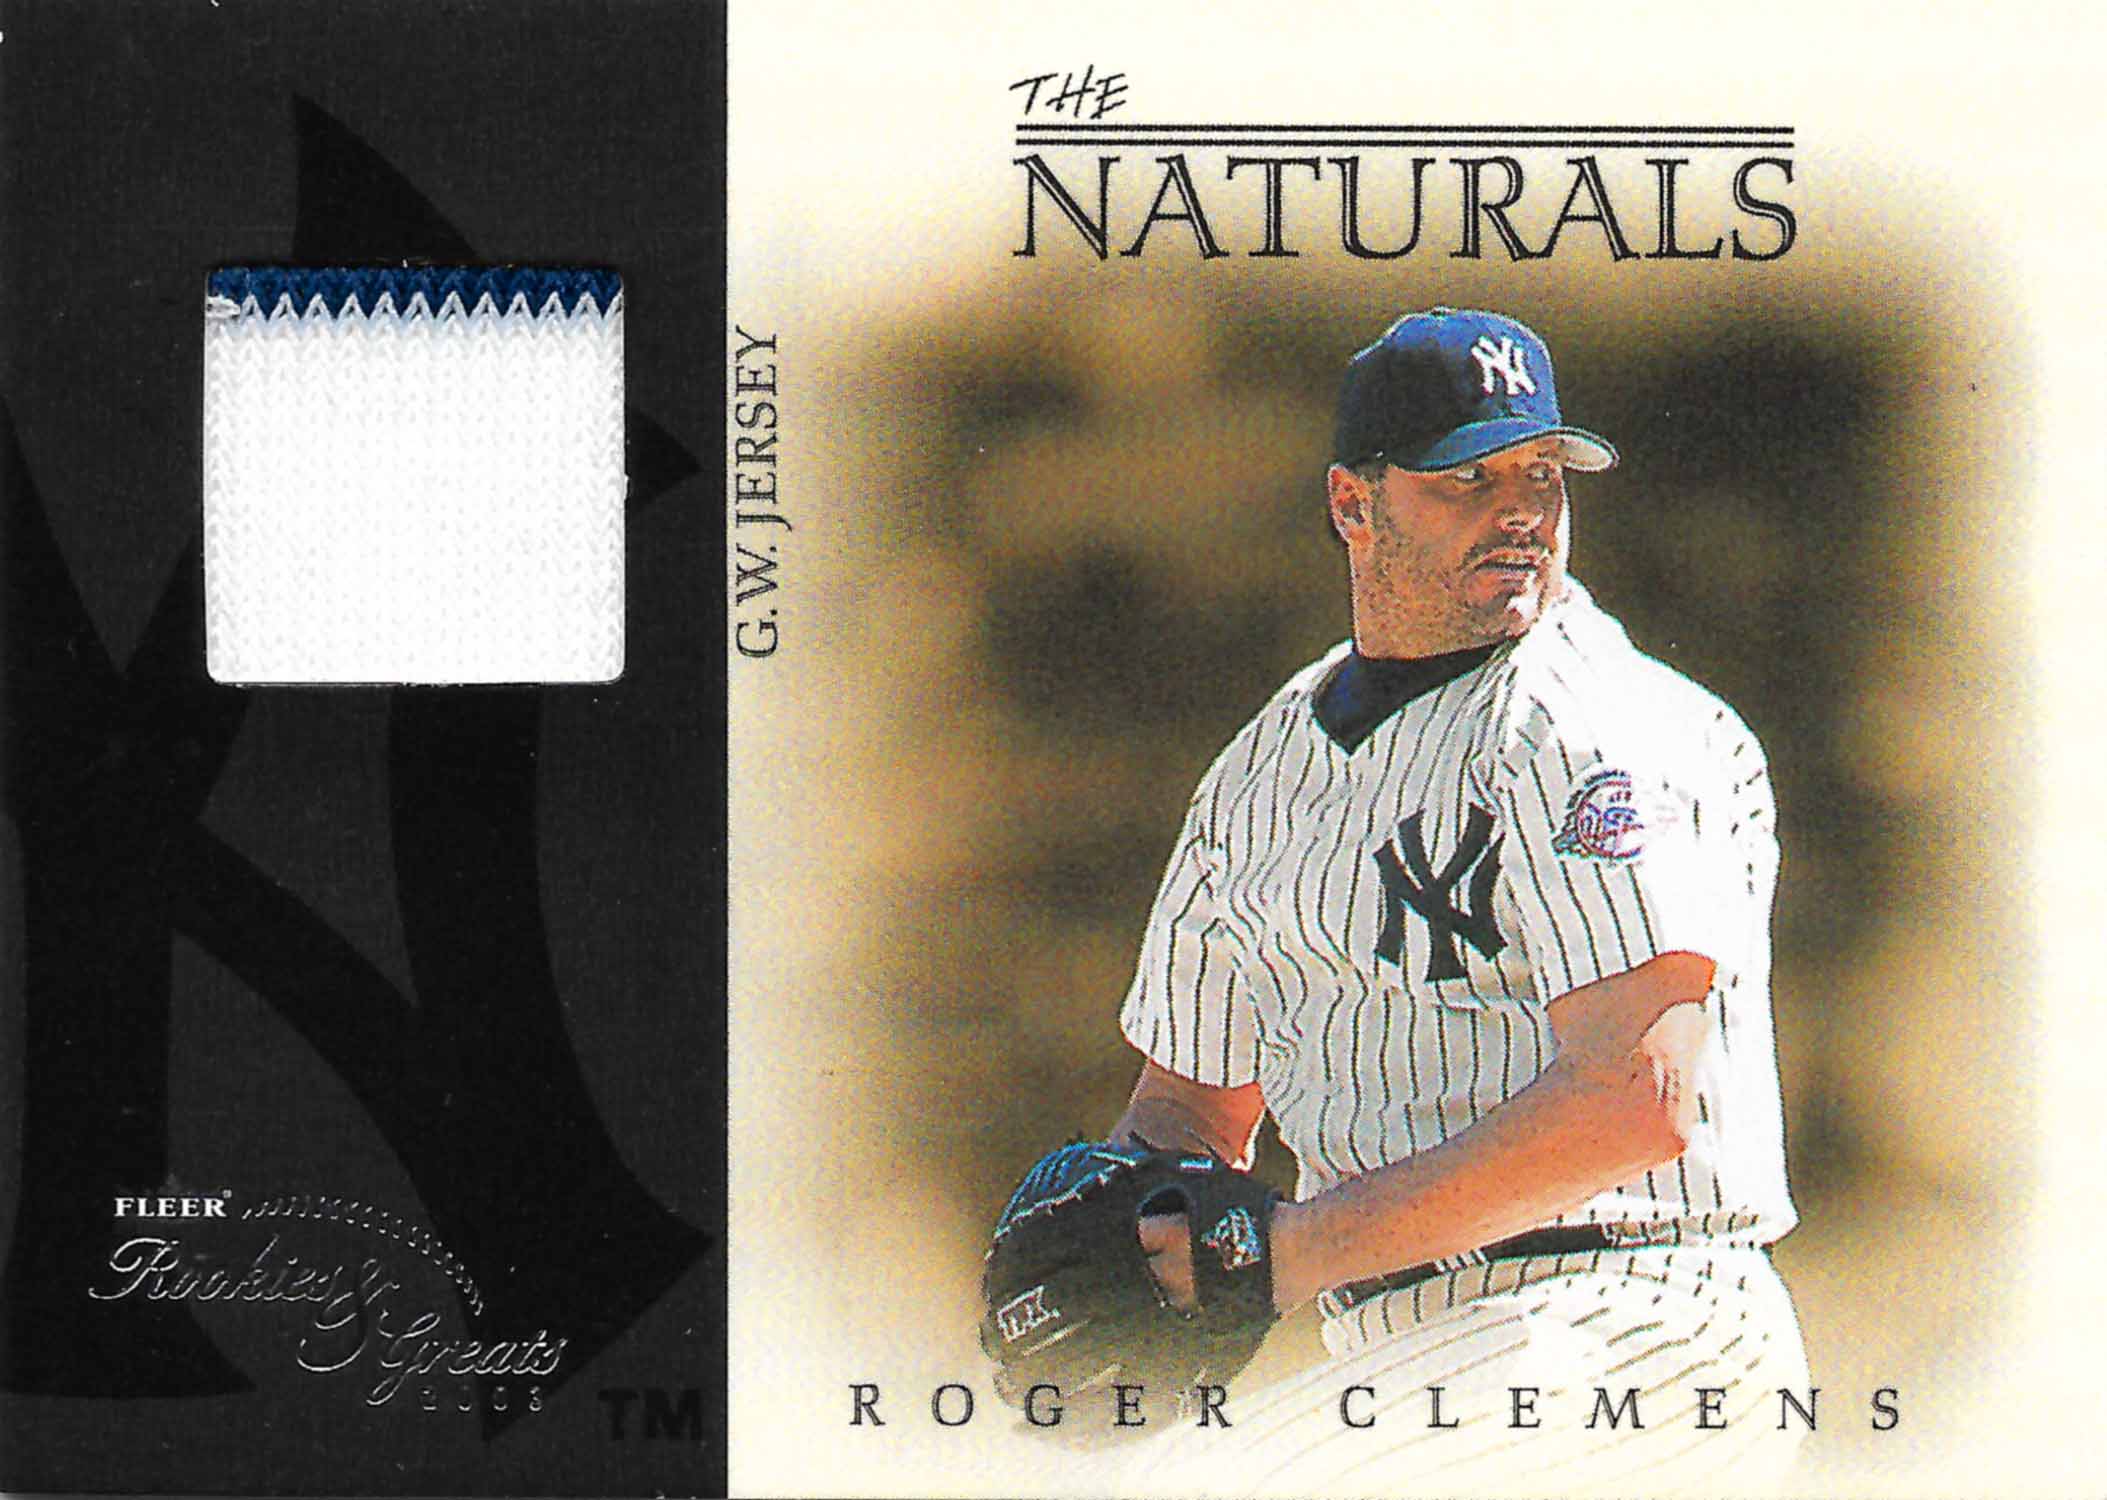 2003 Fleer Rookies and Greats Naturals Game Used Jersey